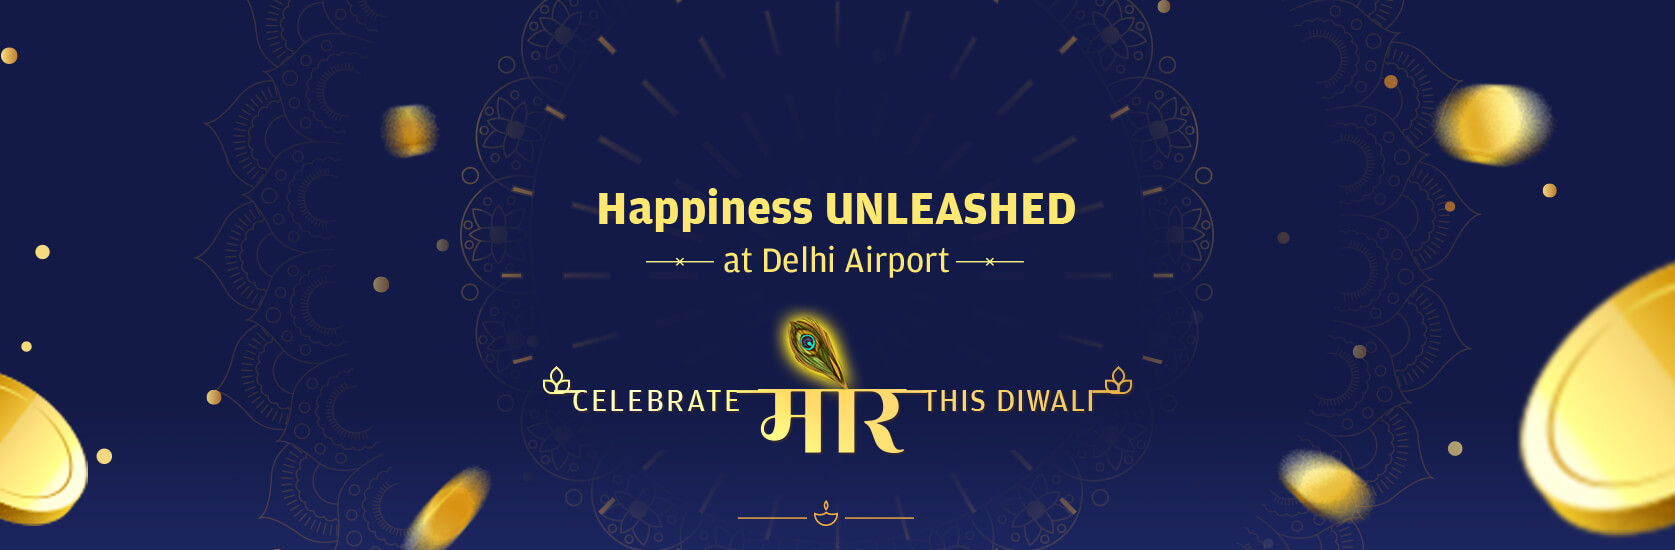 Happiness Unleashed at Delhi Airport